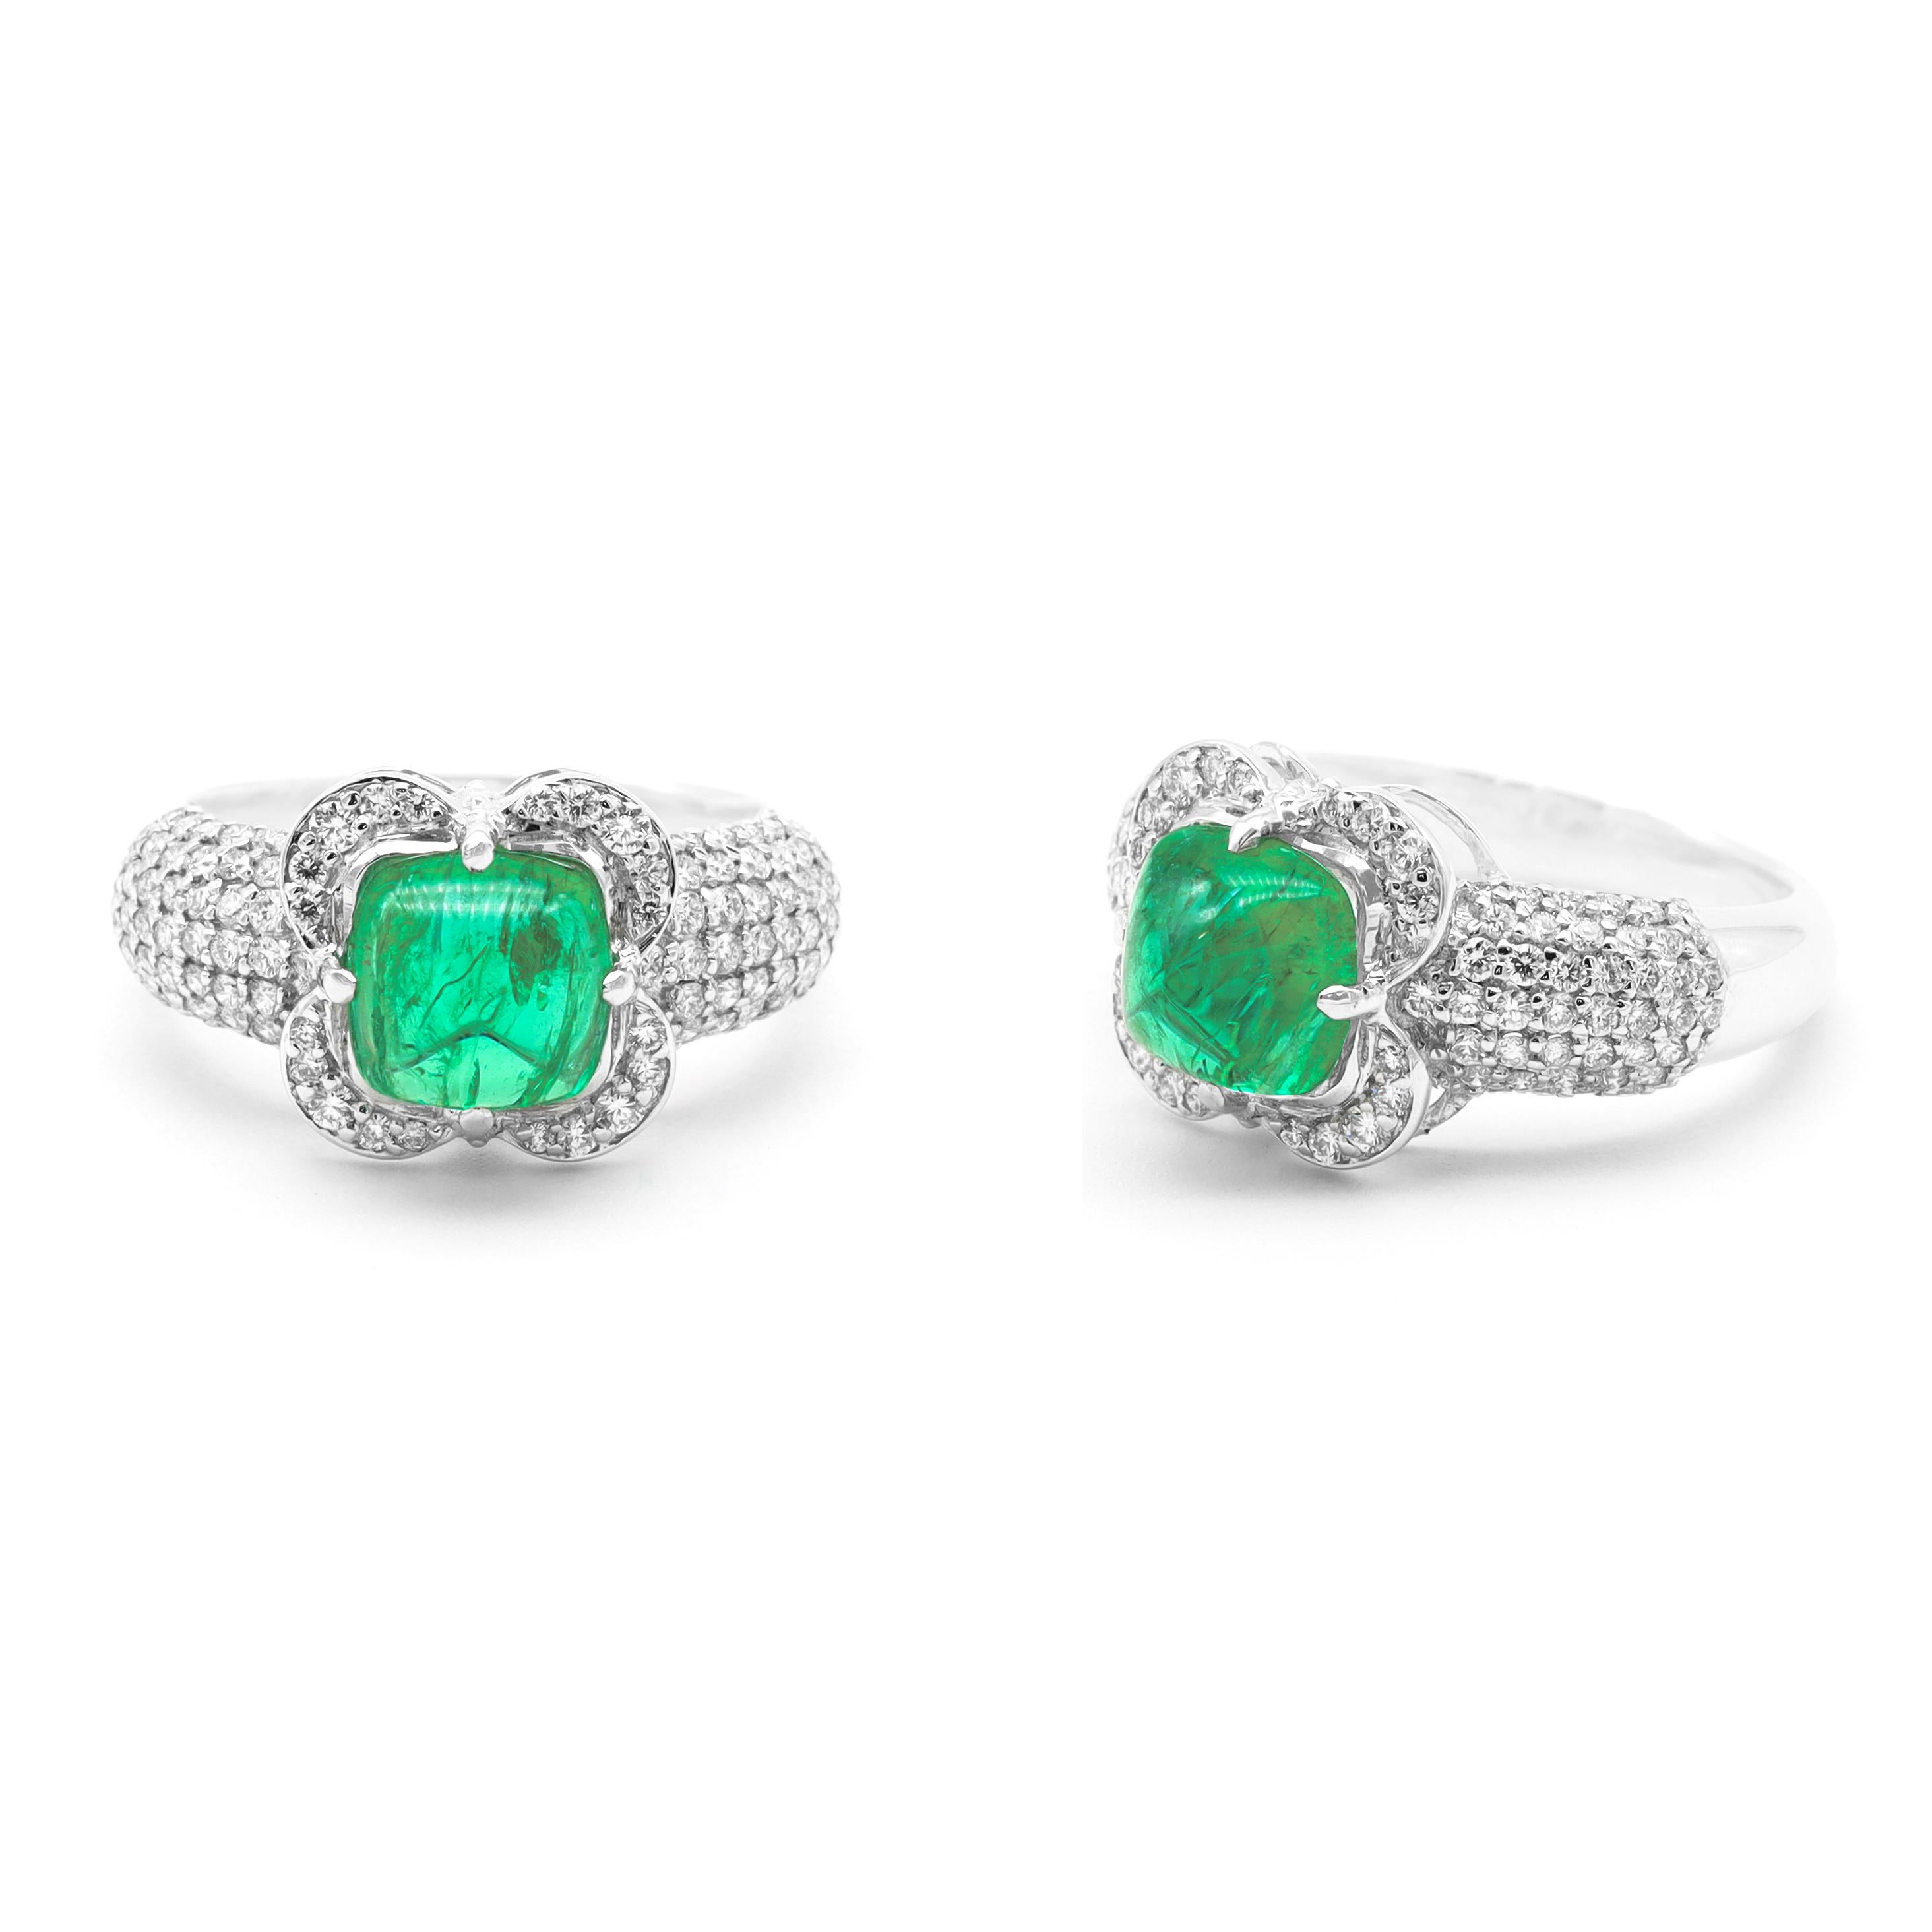 18 Karat White Gold 2.08 Carat Natural Emerald Sugarloaf and Diamond Cluster Ring

This rich green emerald double-cabochon pointed sugarloaf cocktail ring is a masterpiece. The special emerald 4-sided pyramid cut with the smooth glasslike polished